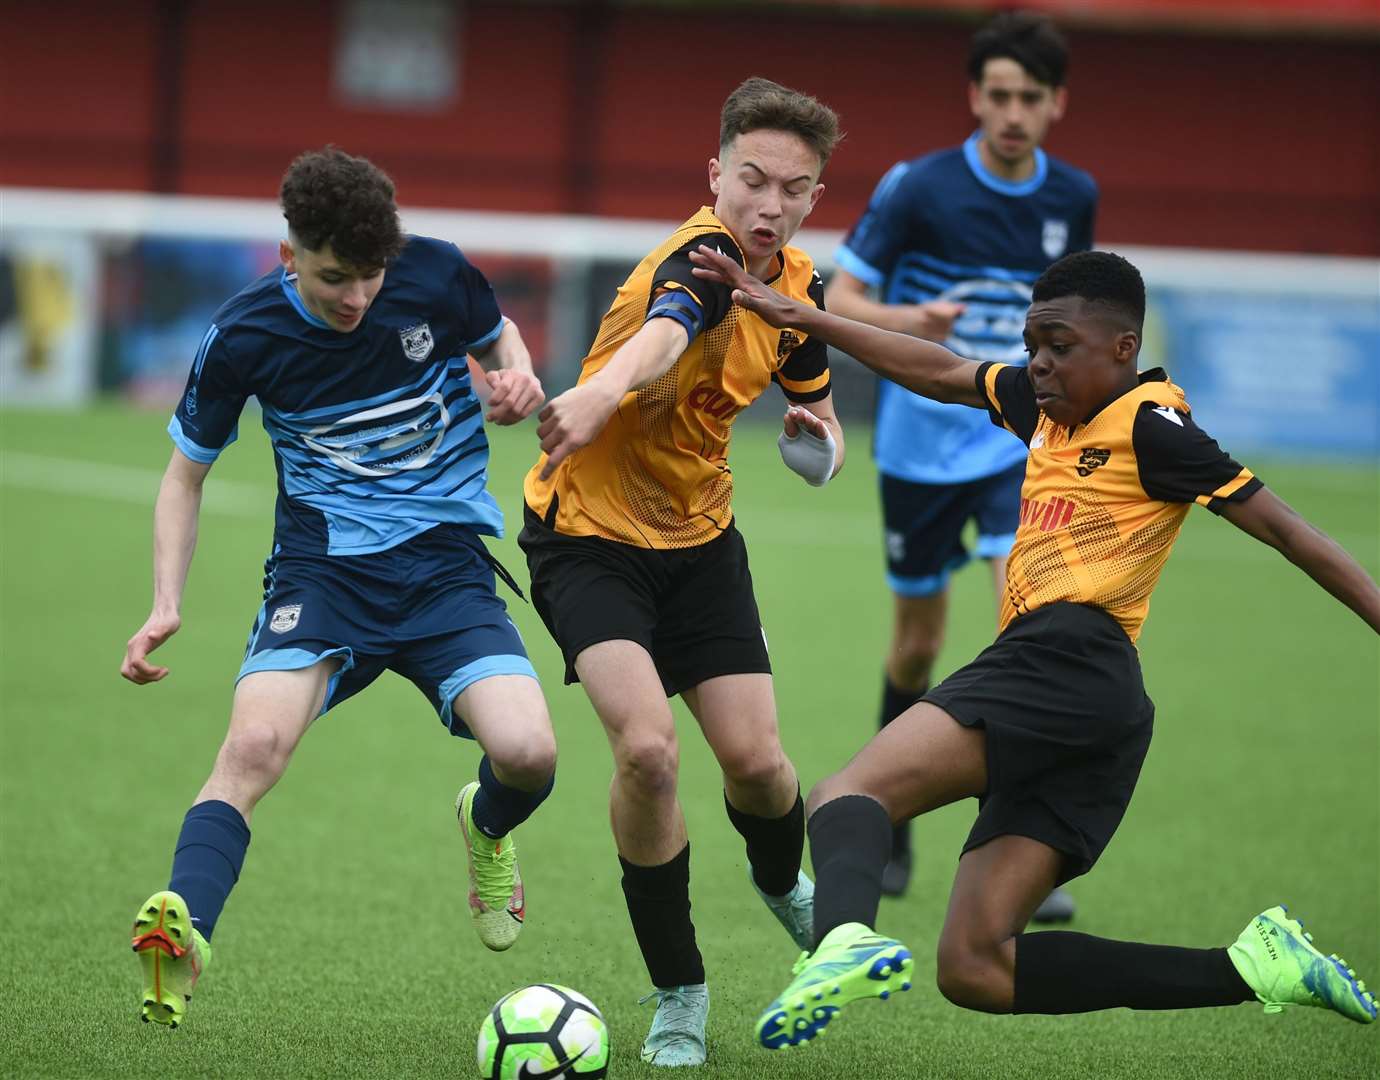 Maidstone United under-14s slide in against Rochester City under-14s (blue). Picture: PSP Images